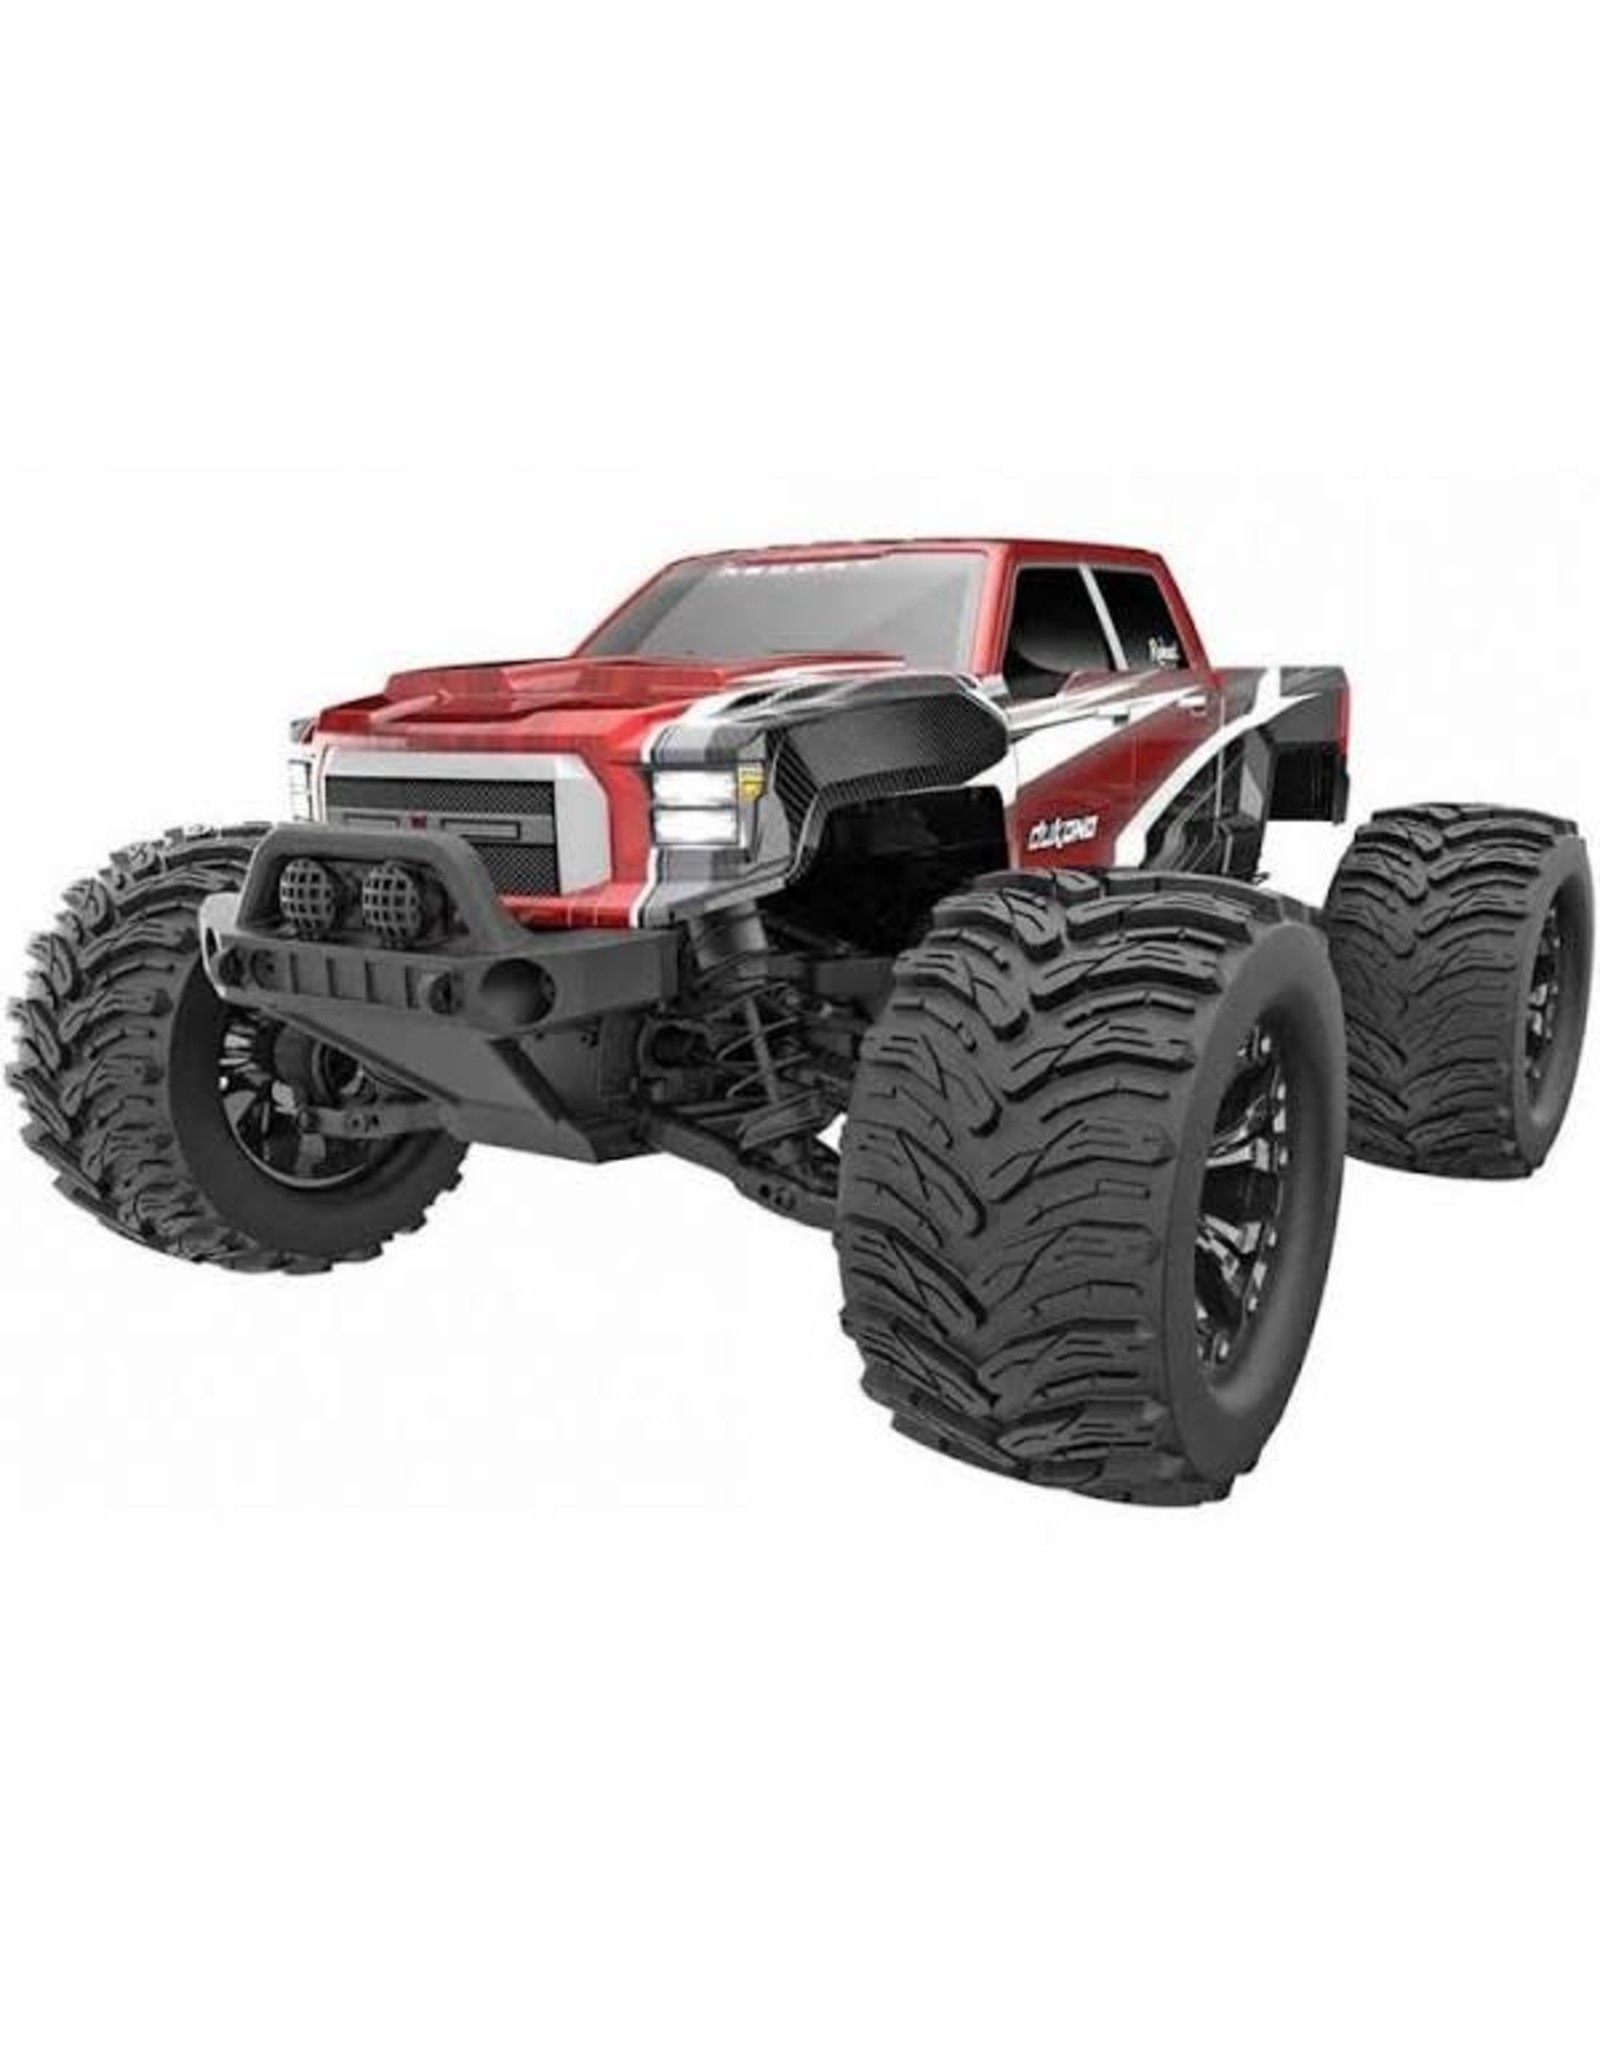 Red Cat Redcat Dukono 1/10 Scale Electric RC Monster Truck